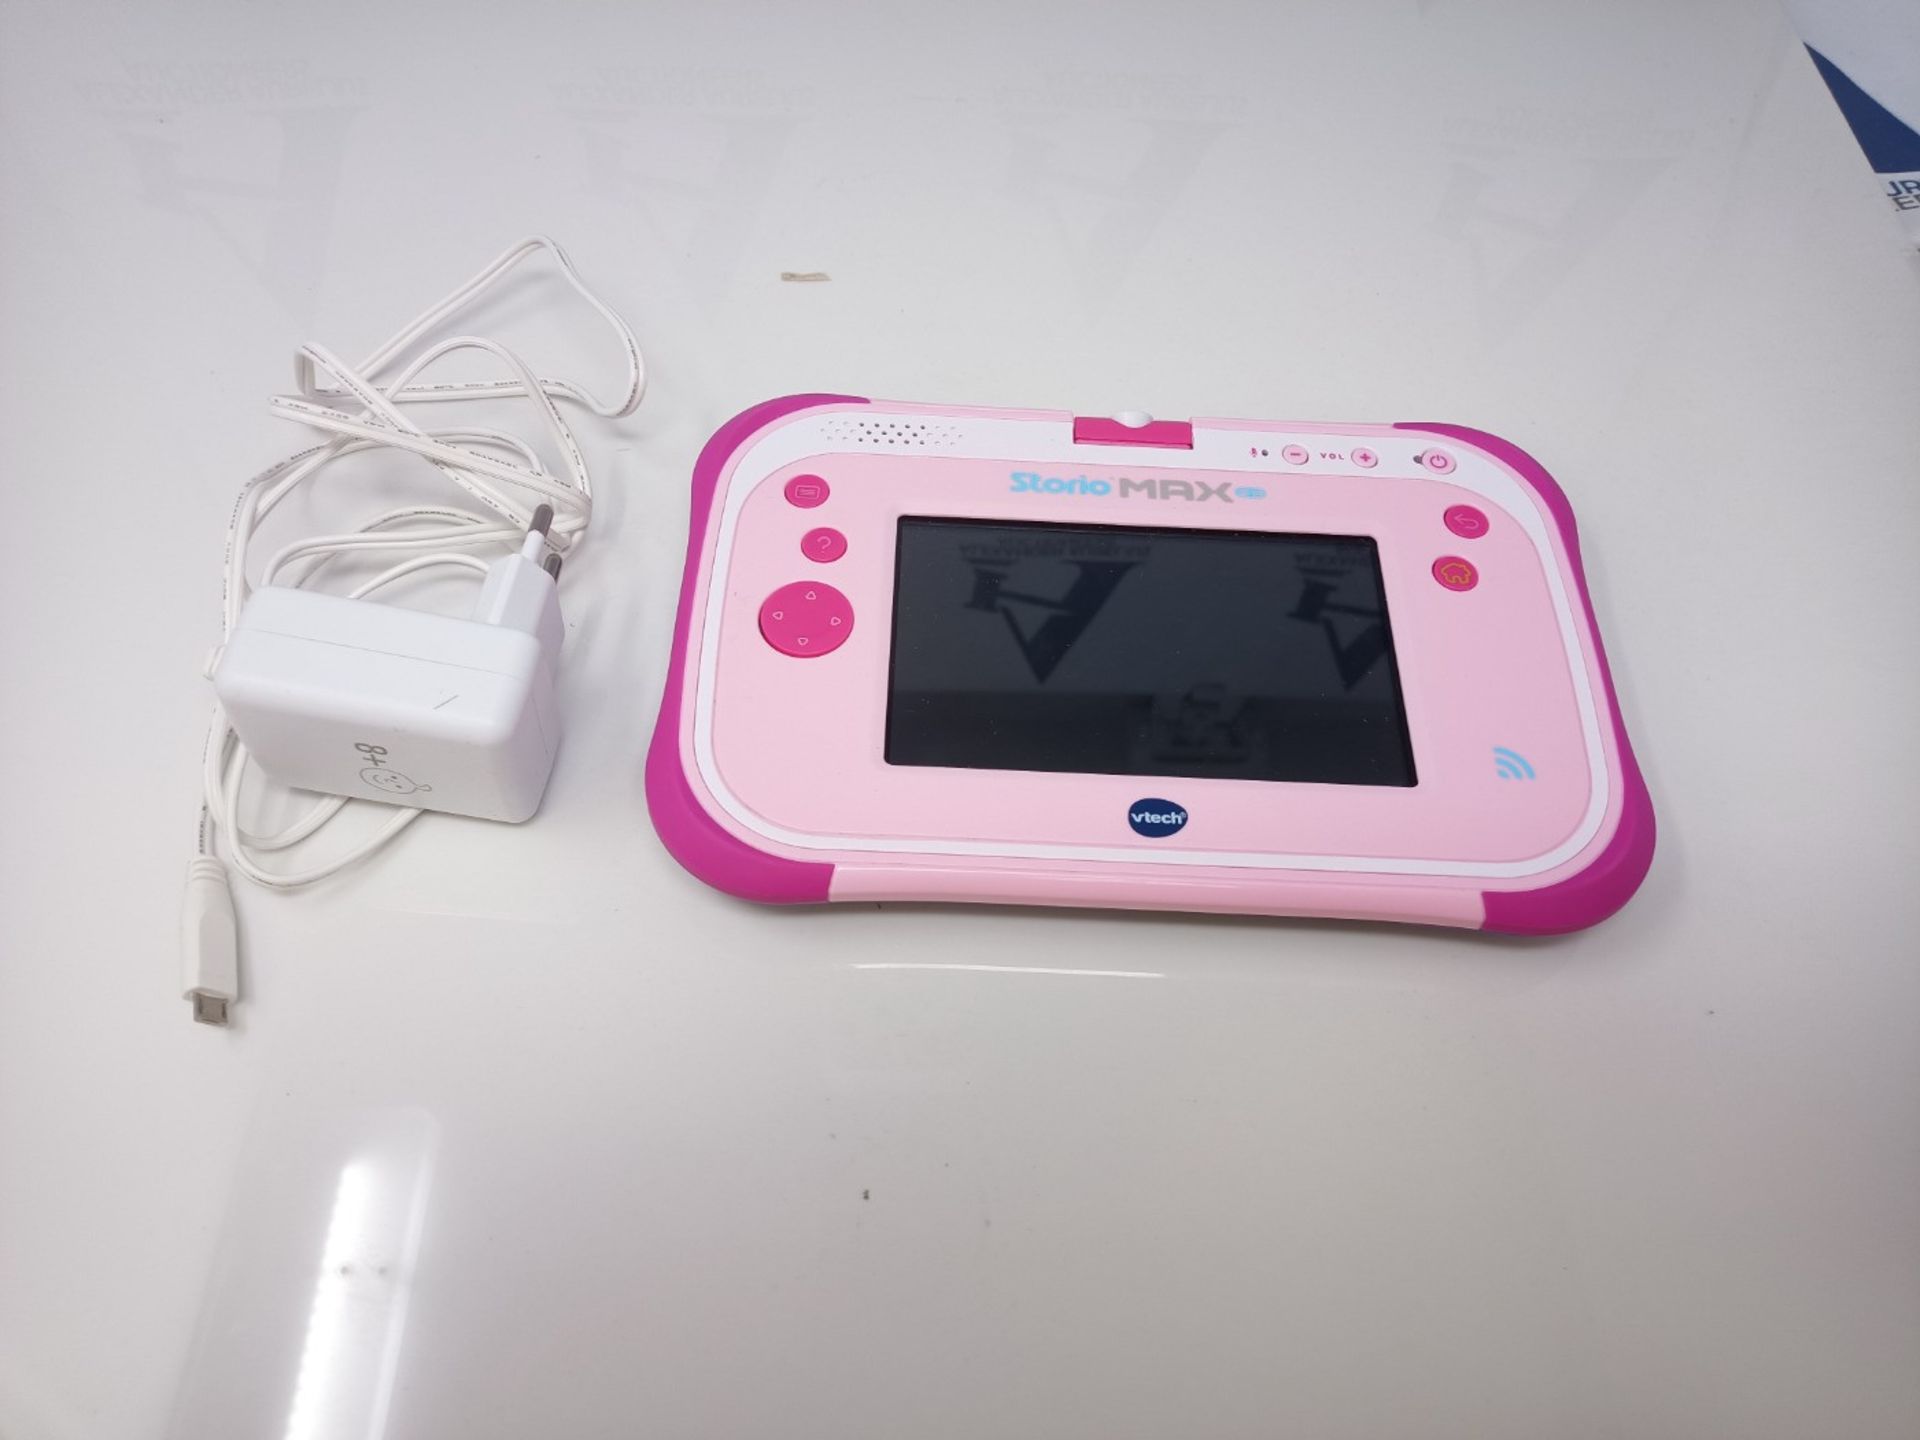 RRP £99.00 Vtech - 108855 - Tablet Storio Max 2.0 - 5 inch - Pink French version - Image 3 of 3